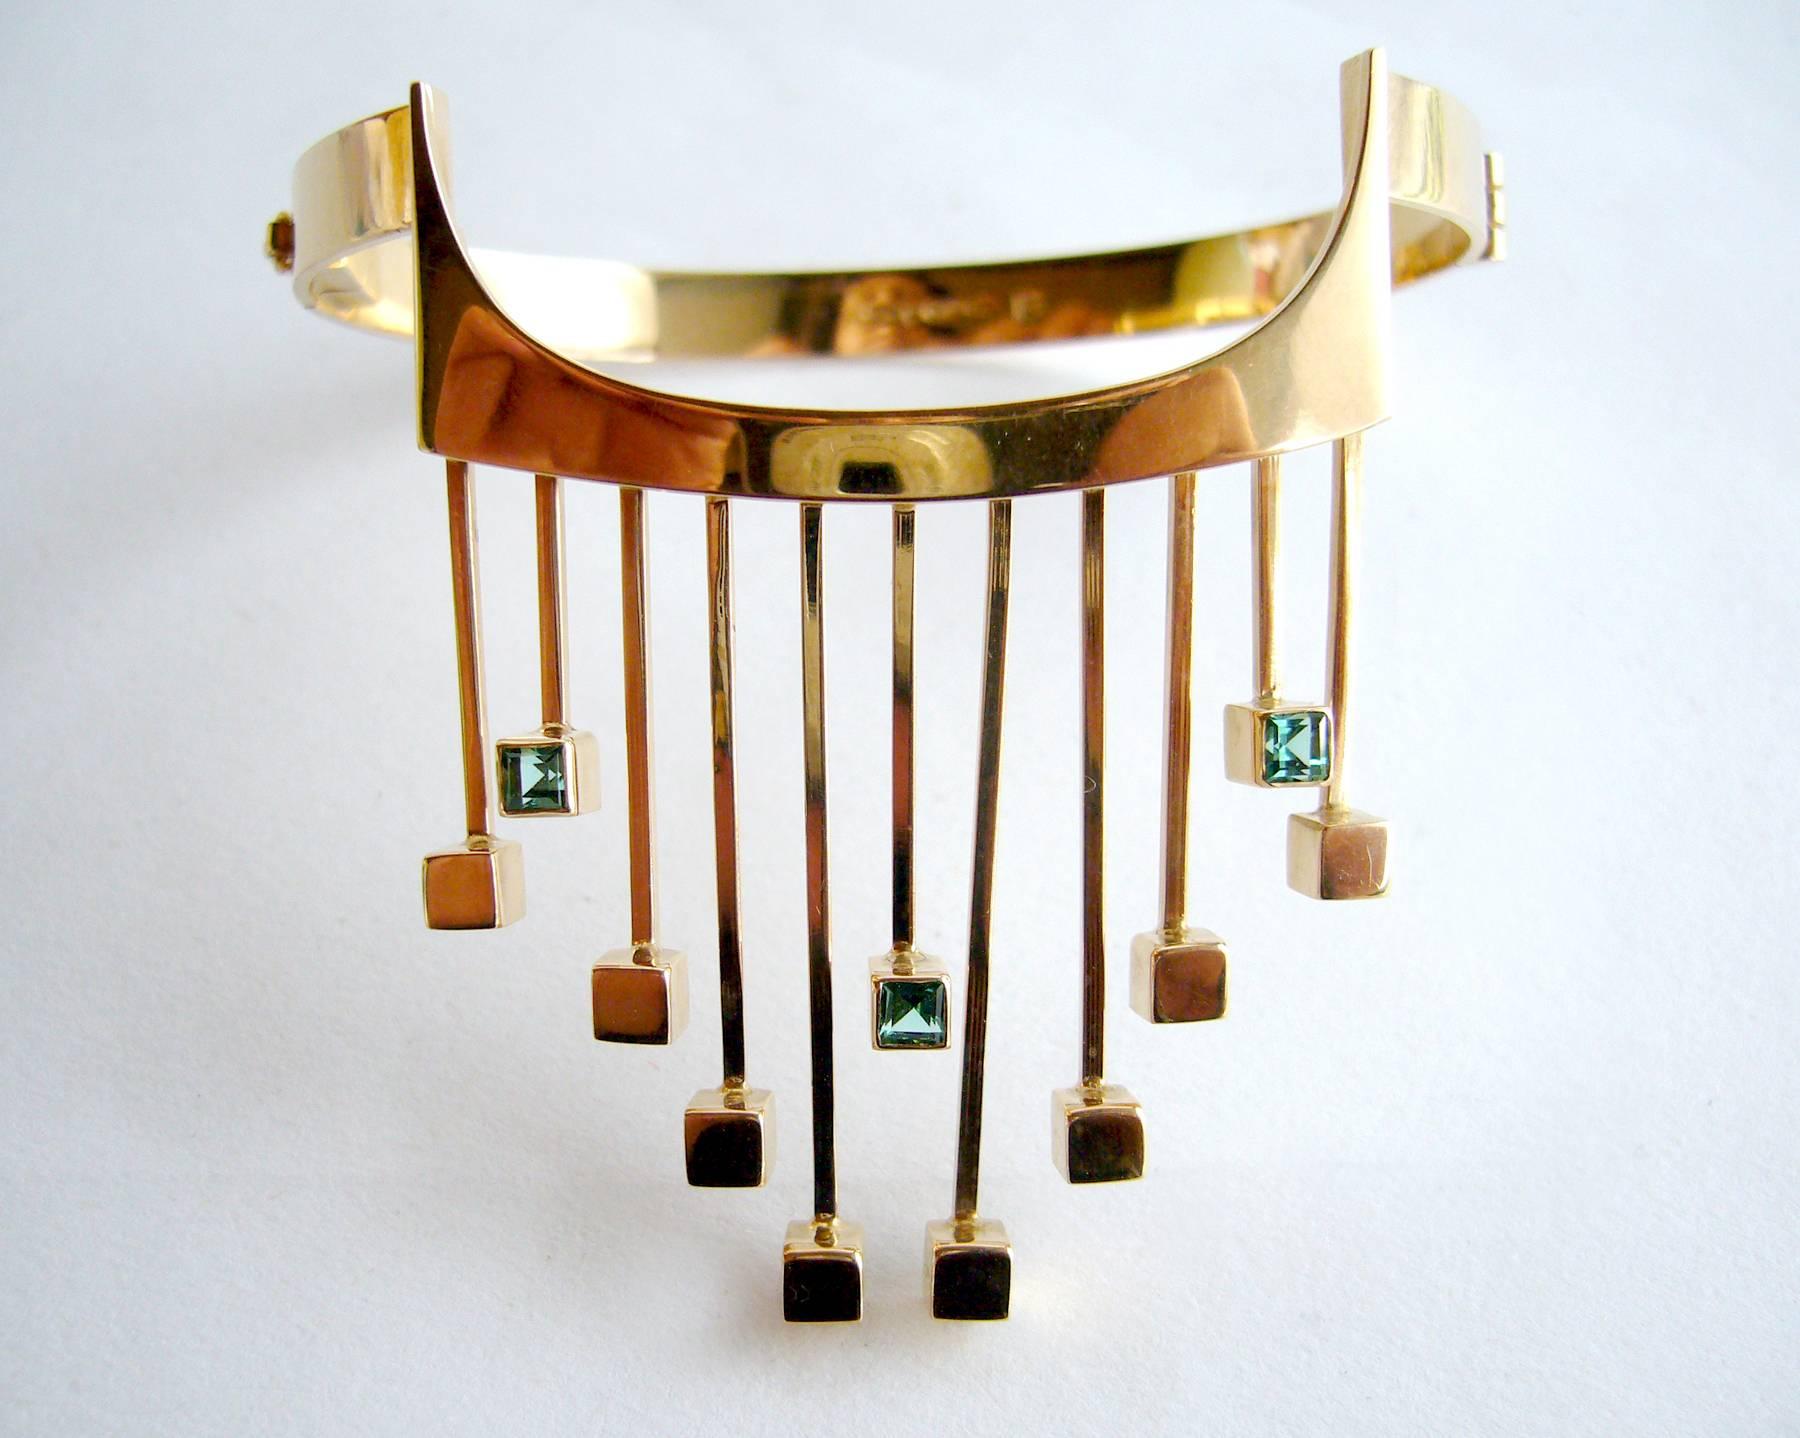 A rare, Finnish modernist 14k gold and tourmaline bracelet designed by Paula Häiväoja and executed by master goldsmith, Timo Nupponen.  Bracelet features golden fringe accented with square-cut greenish-blue tourmalines at the ends and a wearable